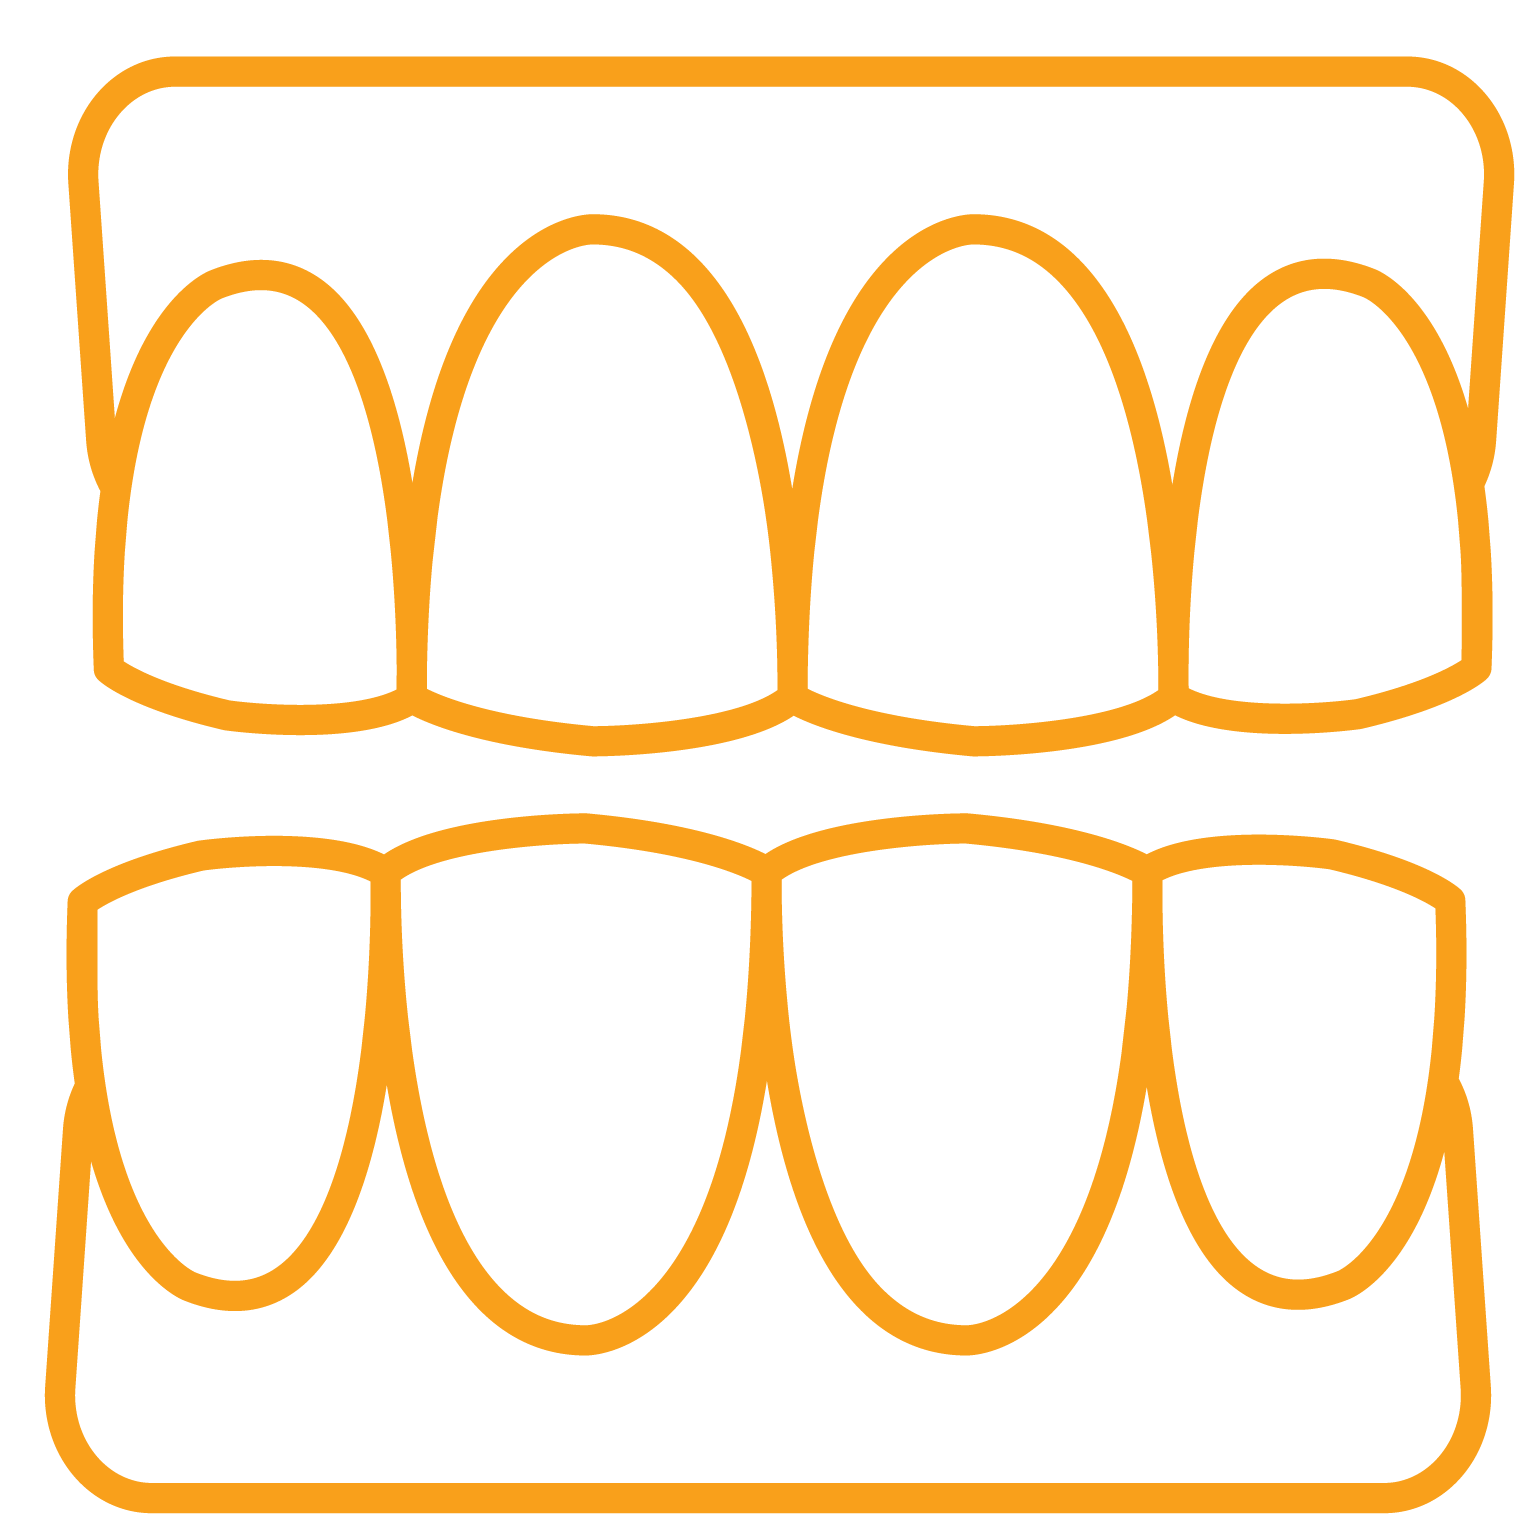 Icon of straight teeth, indicating orthodontic treatment options available at Dr. Kevin Burgdorf's practice.